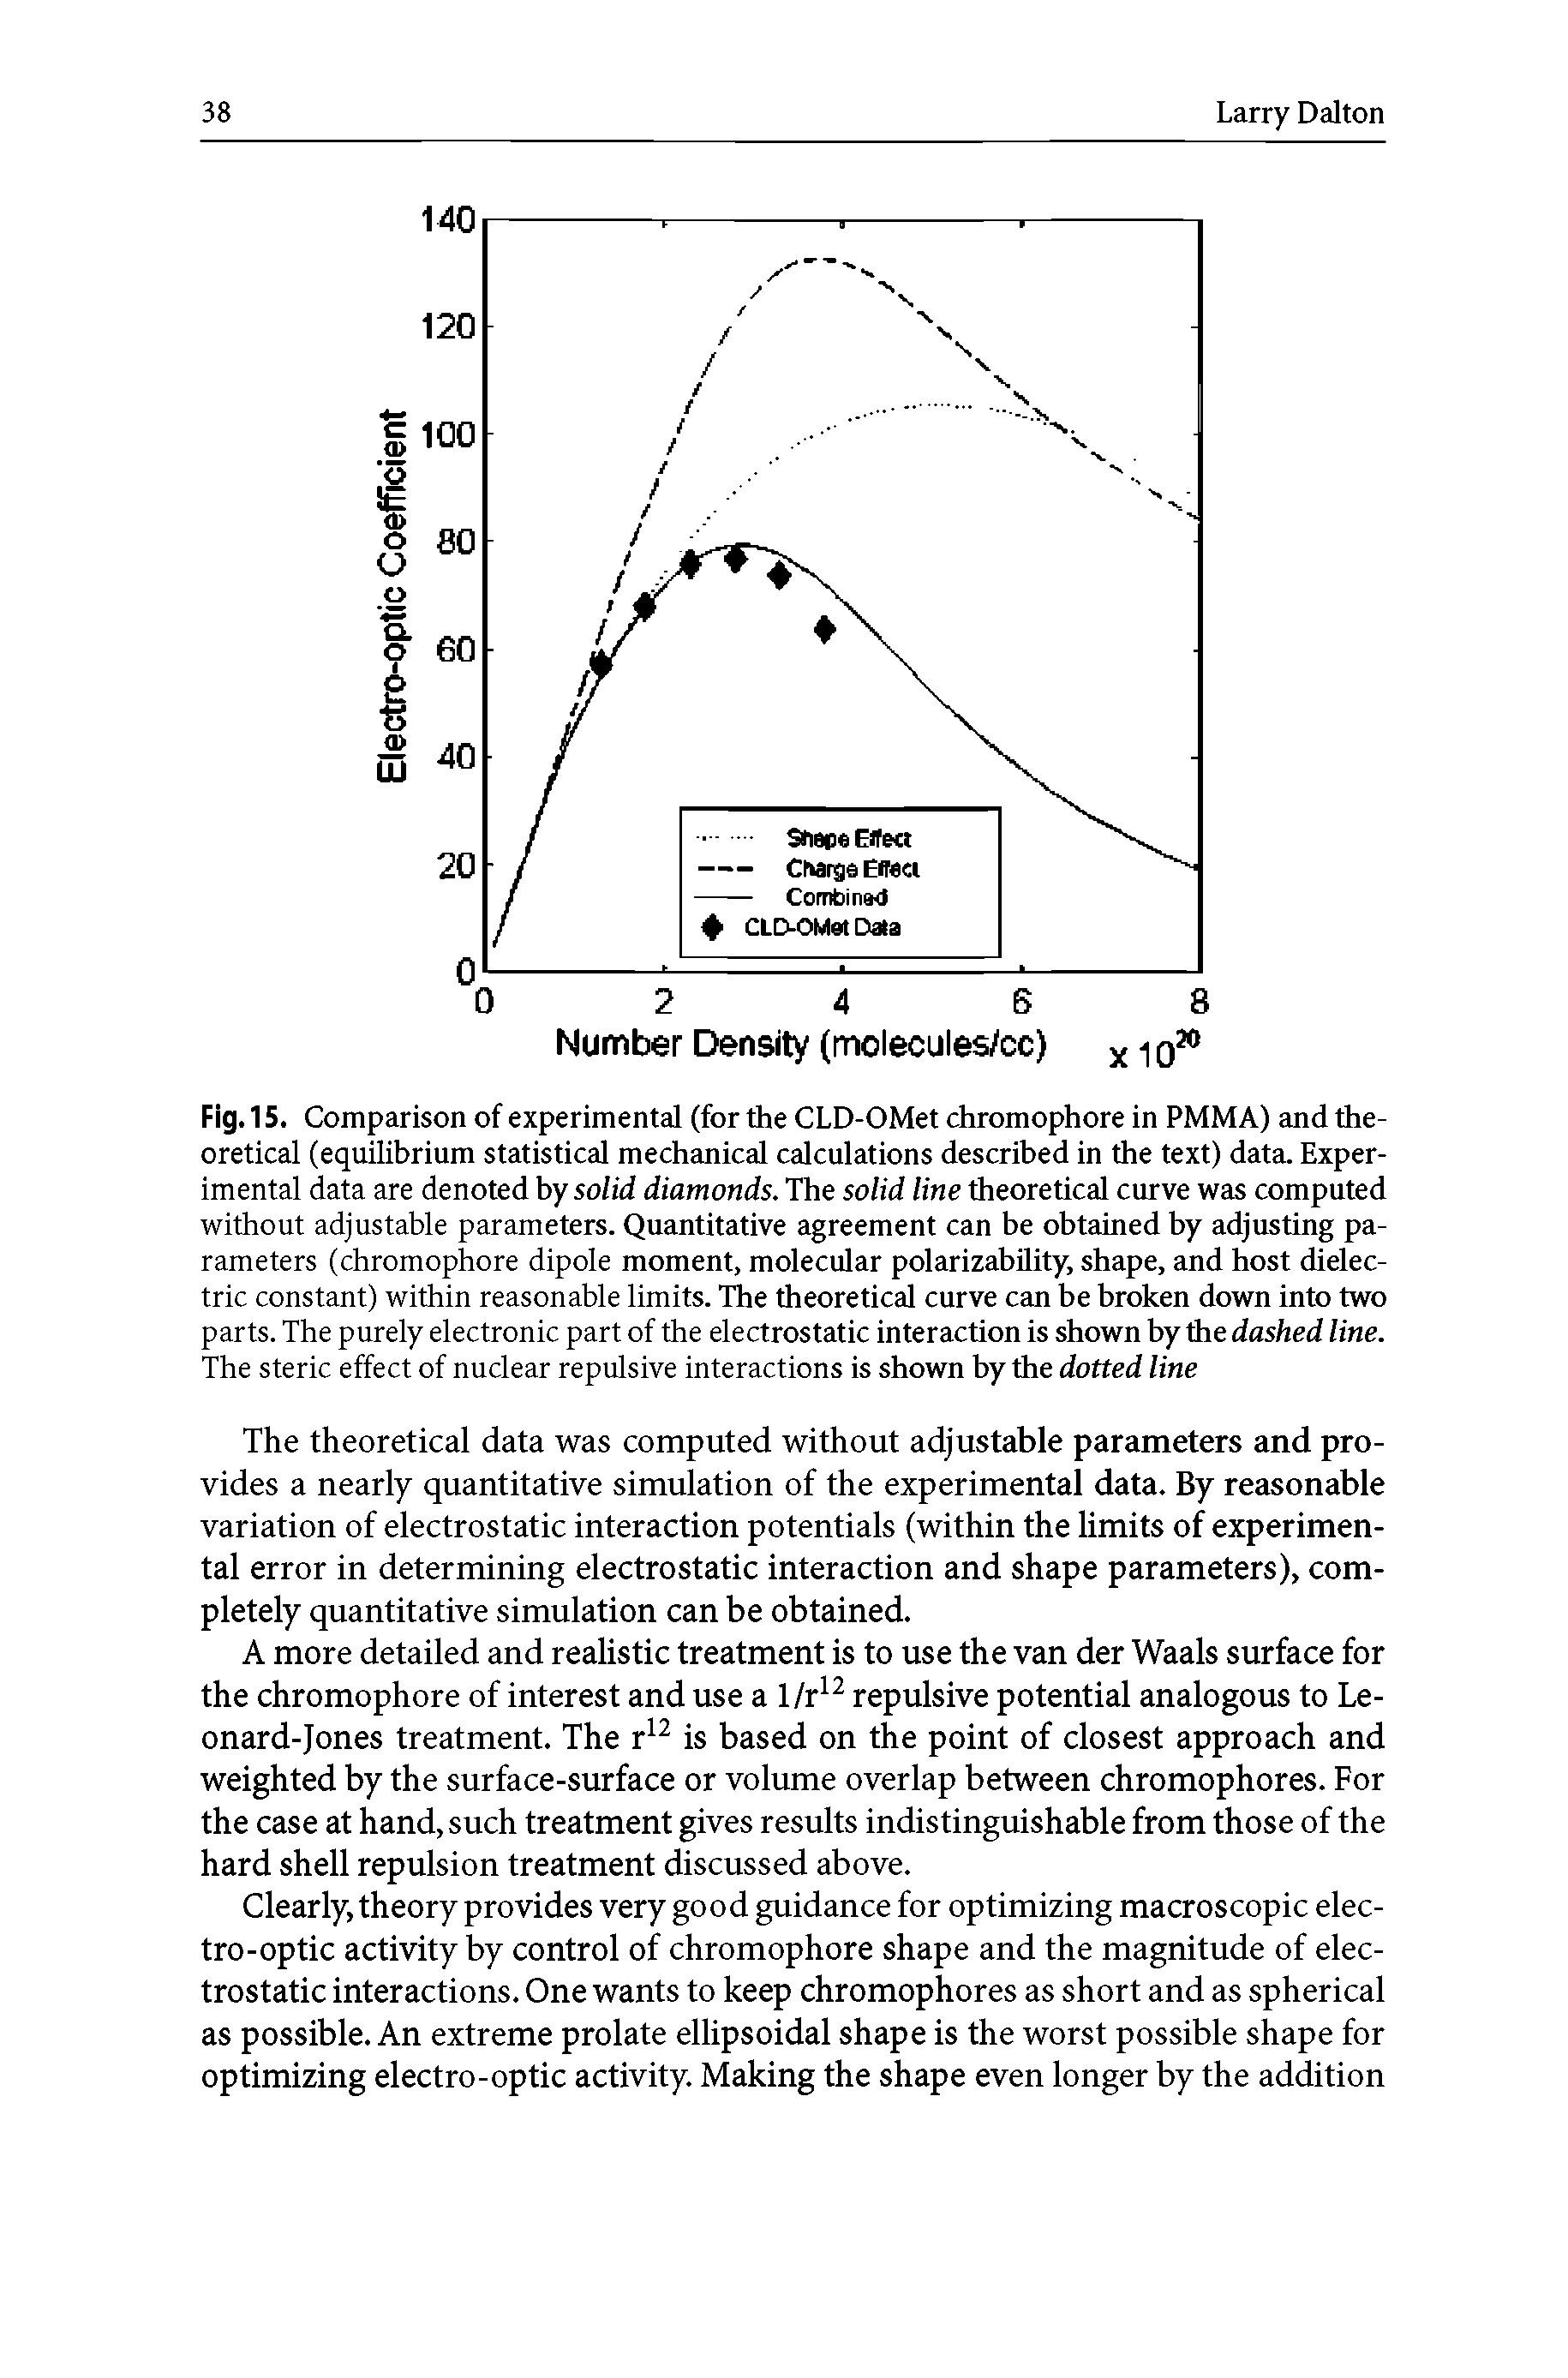 Fig. 15. Comparison of experimental (for the CLD-OMet chromophore in PMMA) and theoretical (equilibrium statistical mechanical calculations described in the text) data. Experimental data are denoted by solid diamonds. The solid line theoretical curve was computed without adjustable parameters. Quantitative agreement can be obtained by adjusting parameters (chromophore dipole moment, molecular polarizability, shape, and host dielectric constant) within reasonable limits. The theoretical curve can be broken down into two parts. The purely electronic part of the electrostatic interaction is shown by the dashed line. The steric effect of nuclear repulsive interactions is shown by the dotted line...